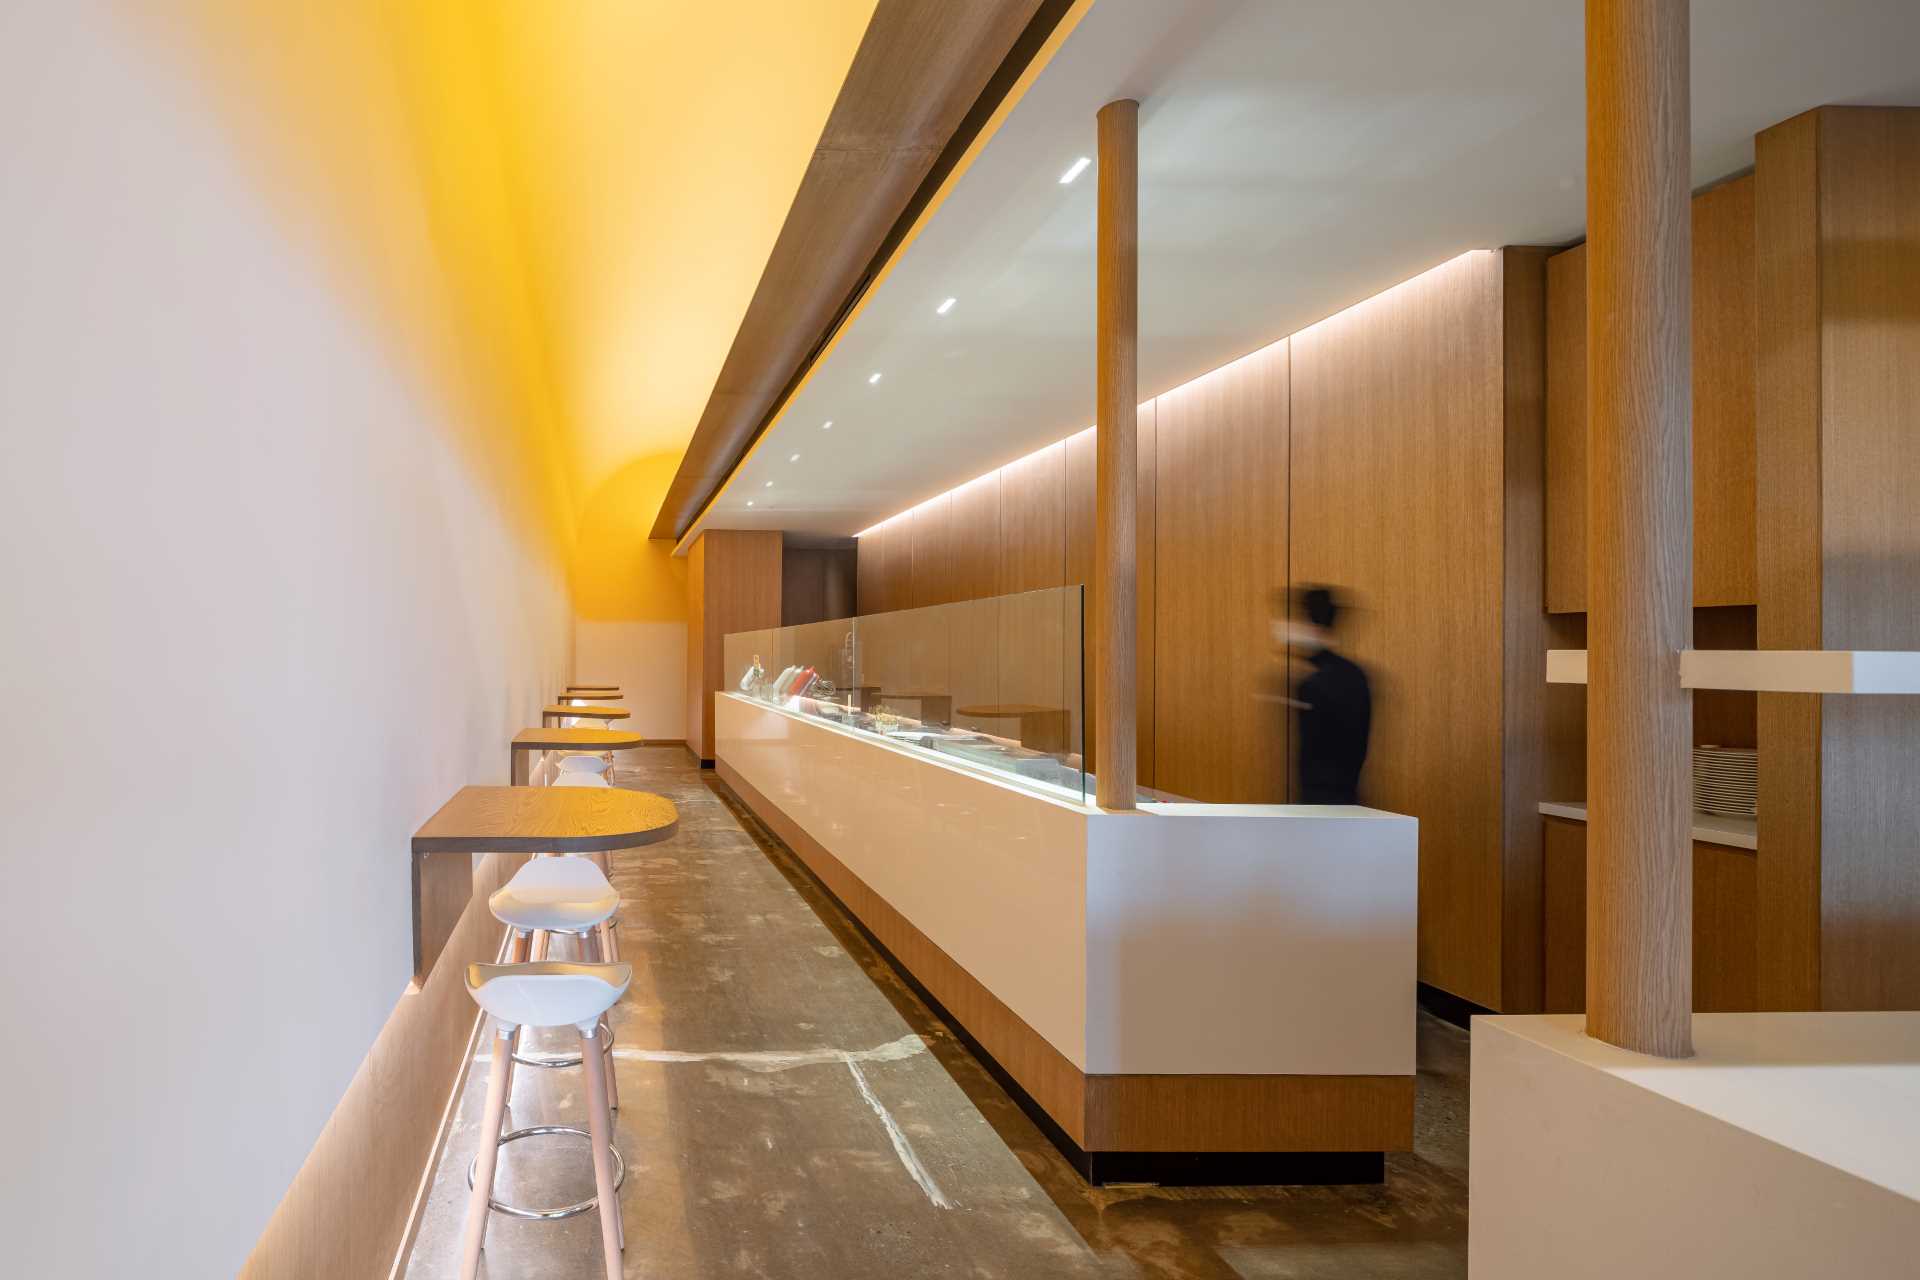 A modern cafe with an exposed kitchen and minimalist serving area.